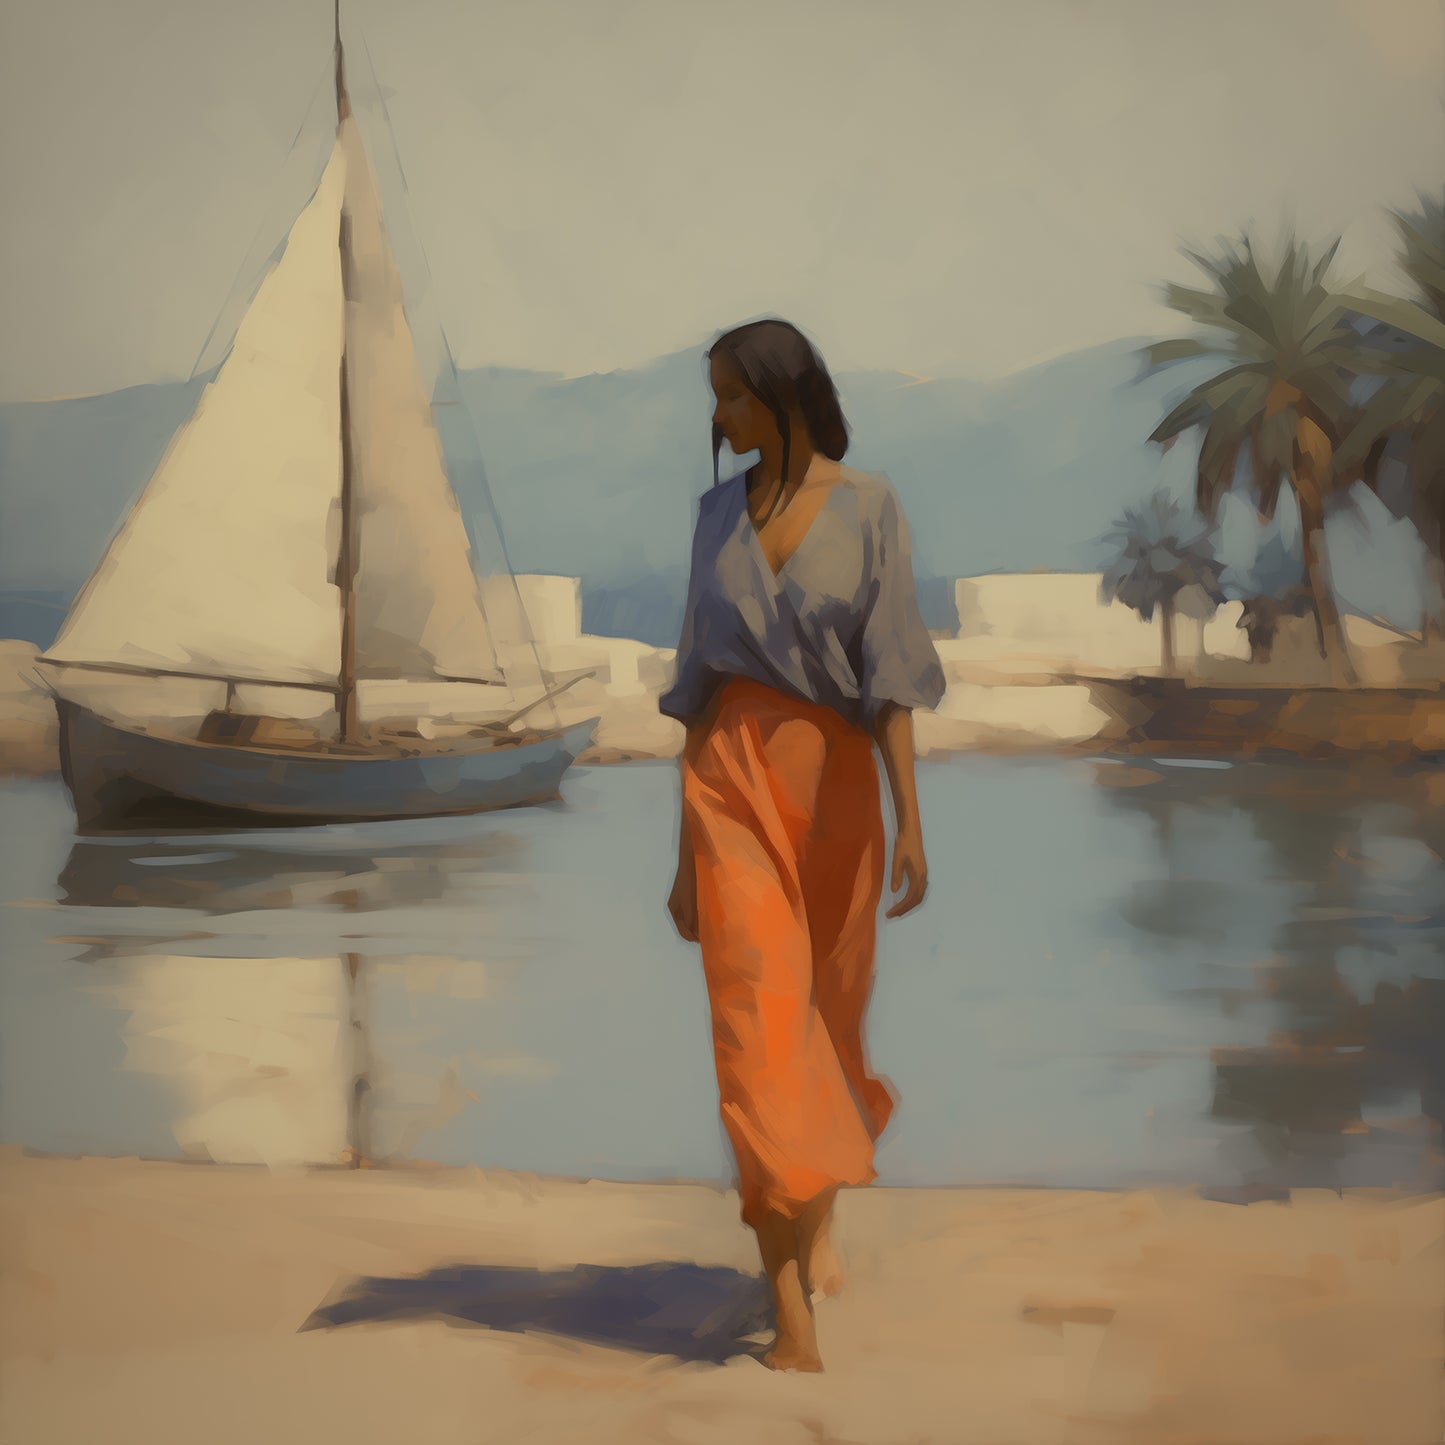 WOMAN AND BOAT